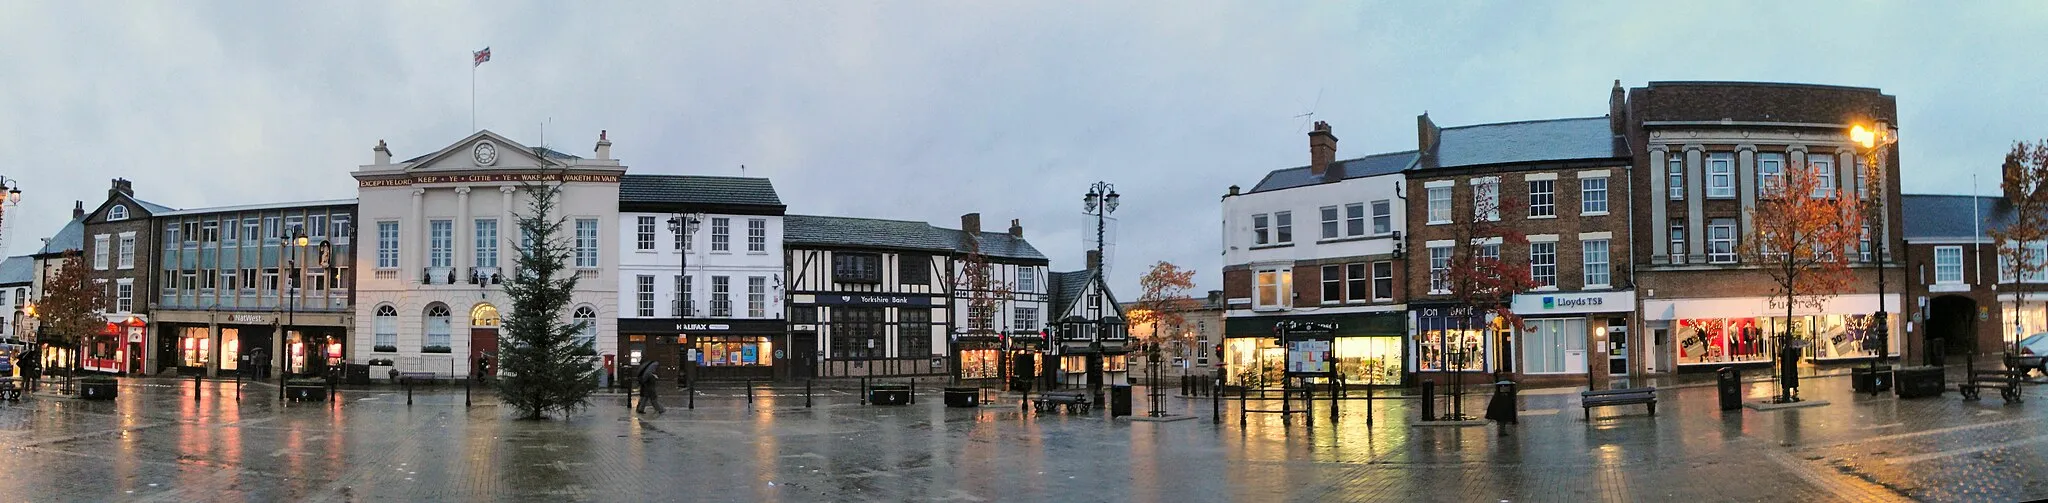 Photo showing: The Market of Ripon as seen from the central obelisk (180° panorama)